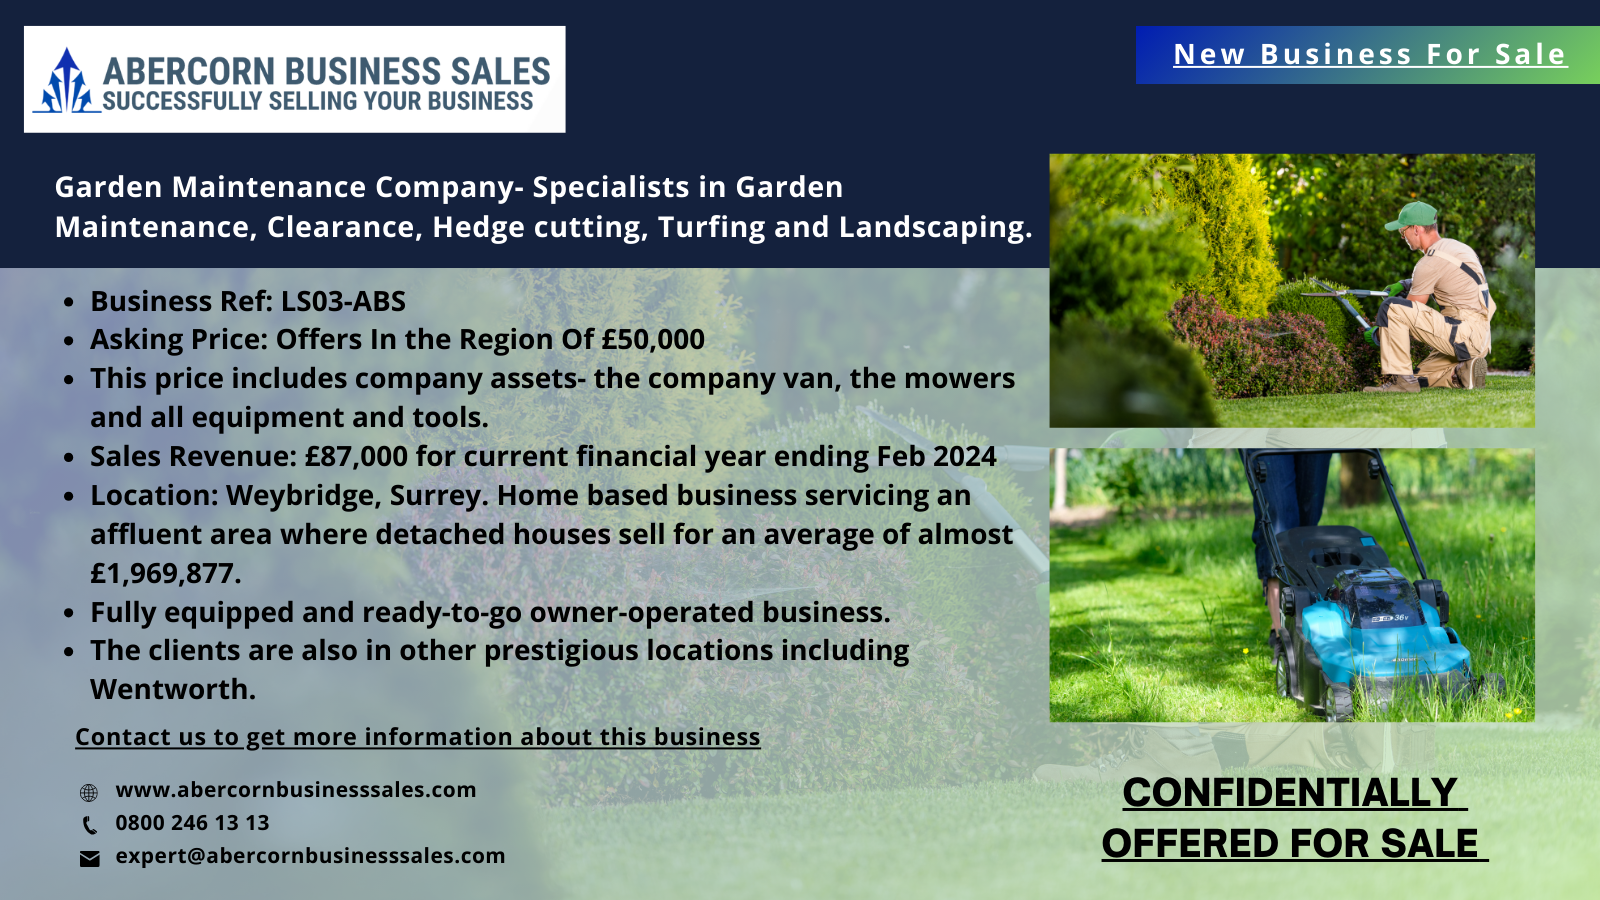 Garden Maintenance Company- Specialists in Garden Maintenance, Clearance, Hedge cutting, Turfing and Landscaping.